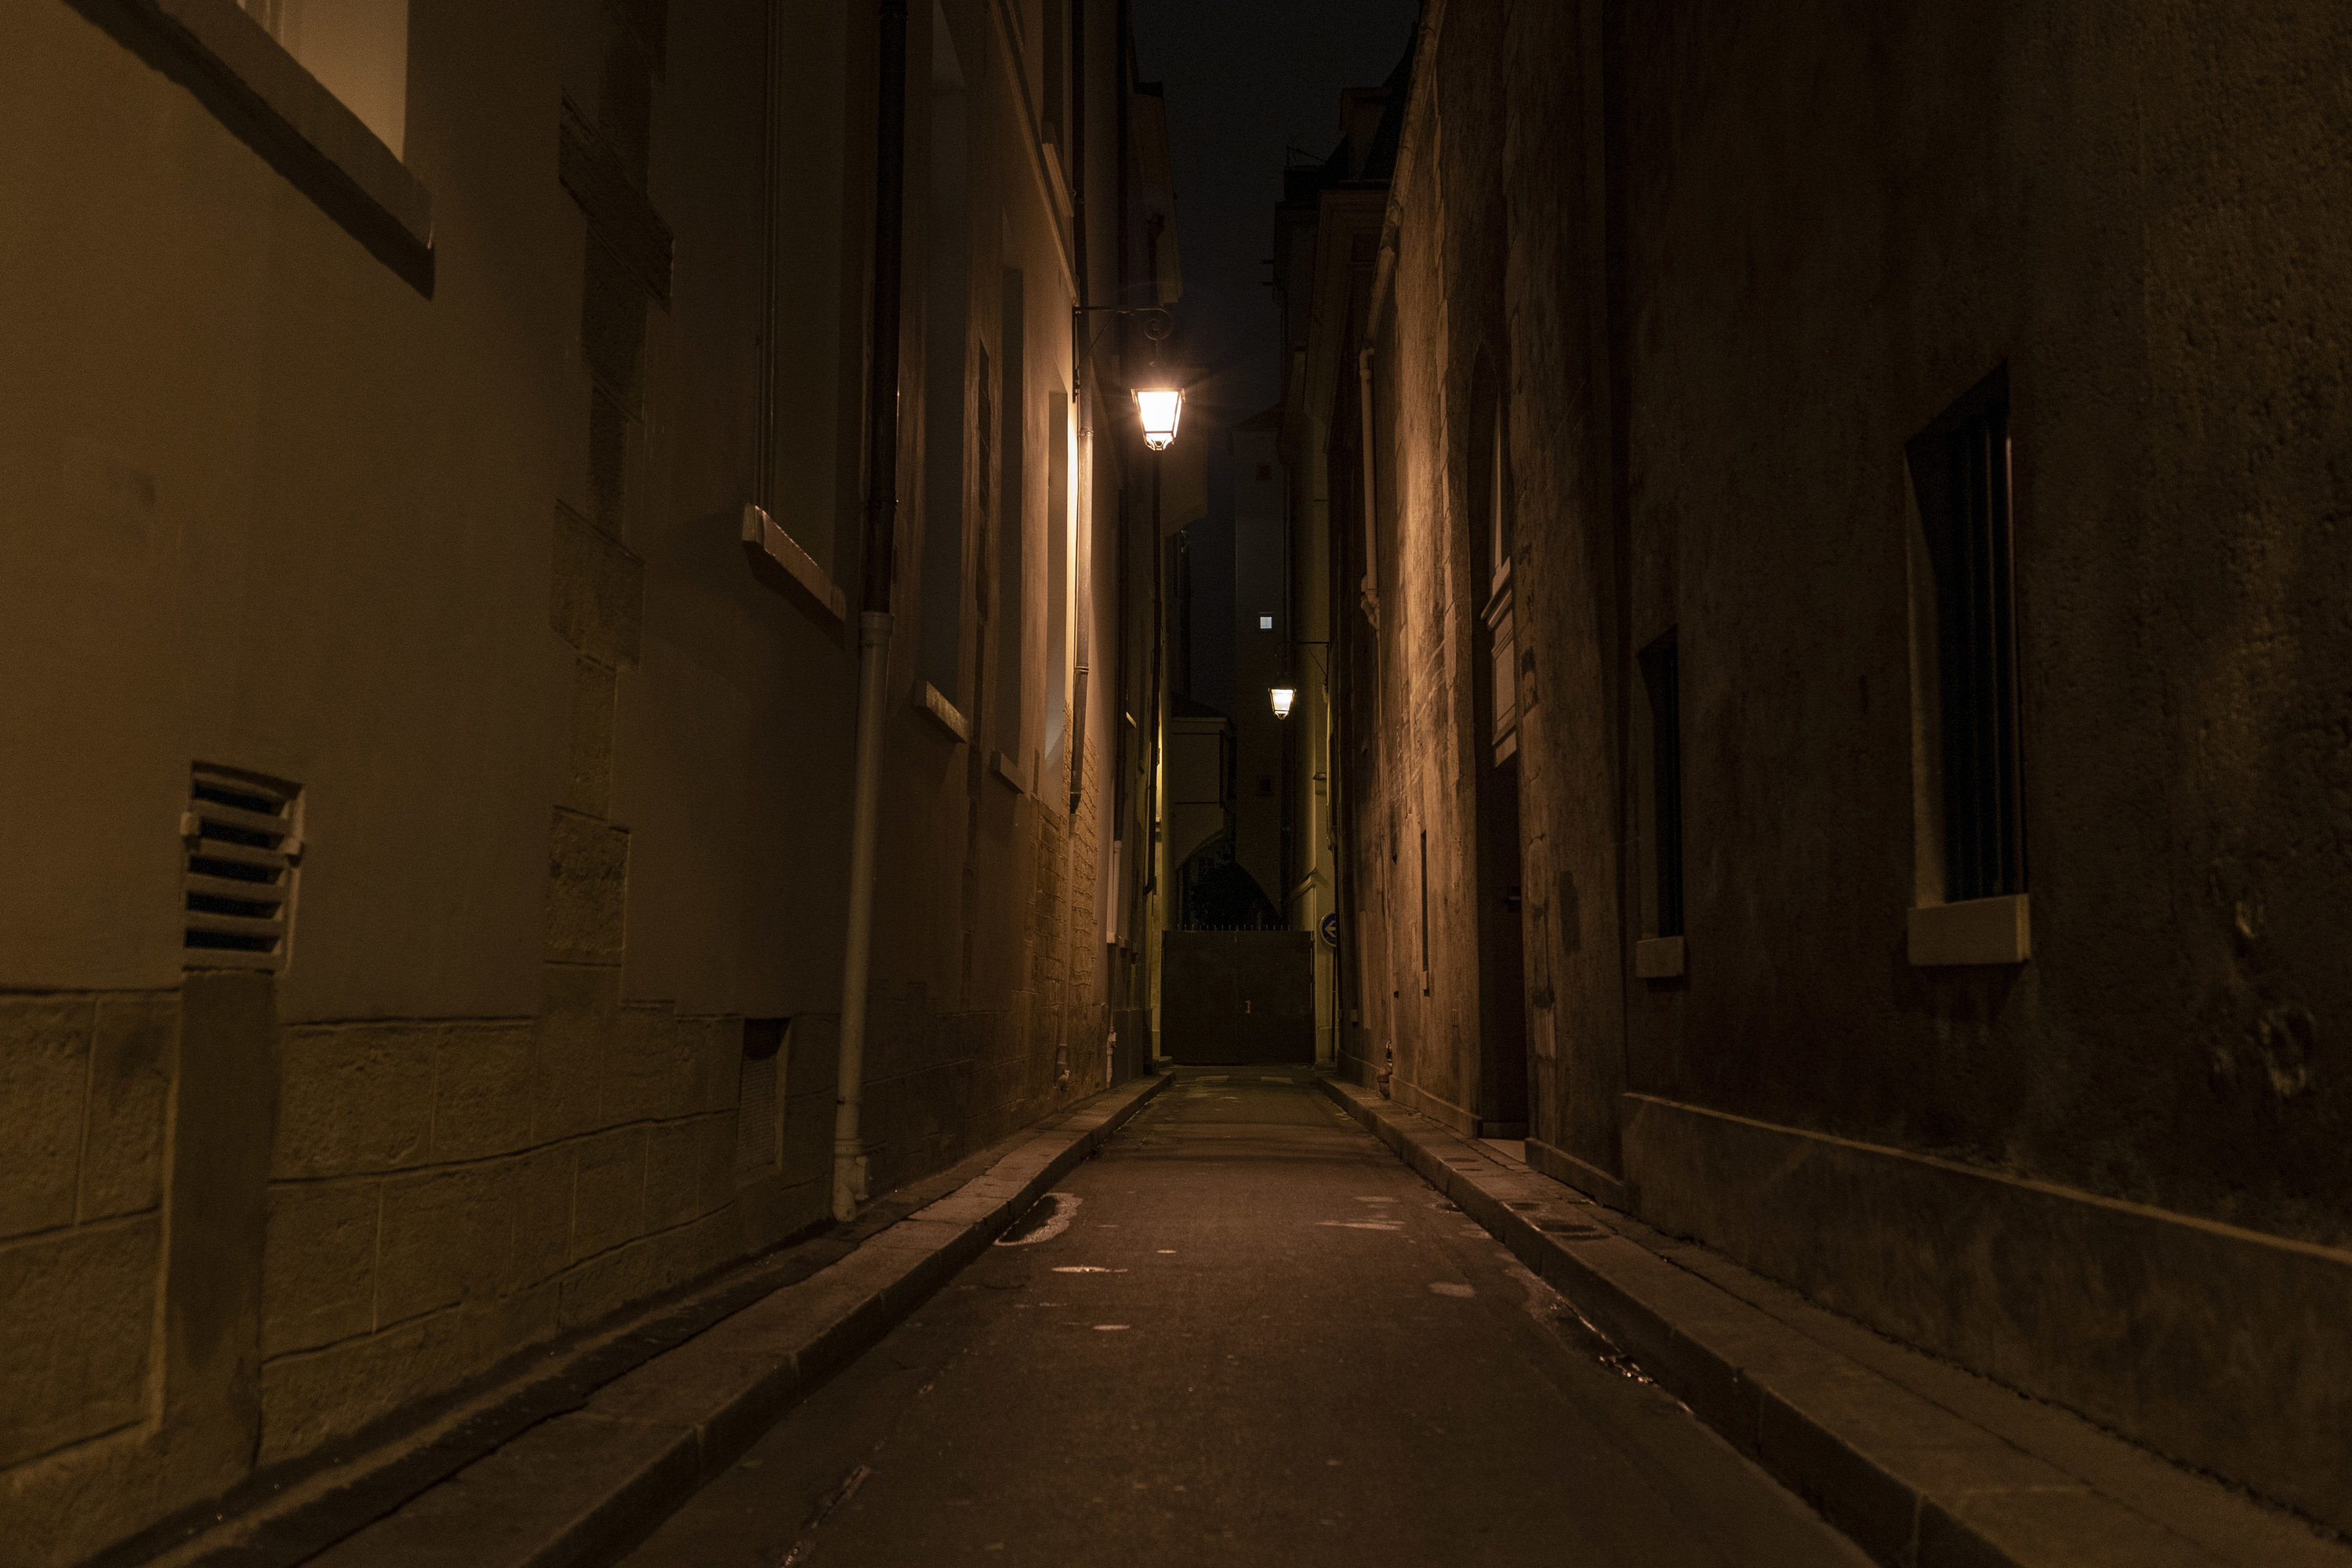 A dark alley at night with only dim lighting